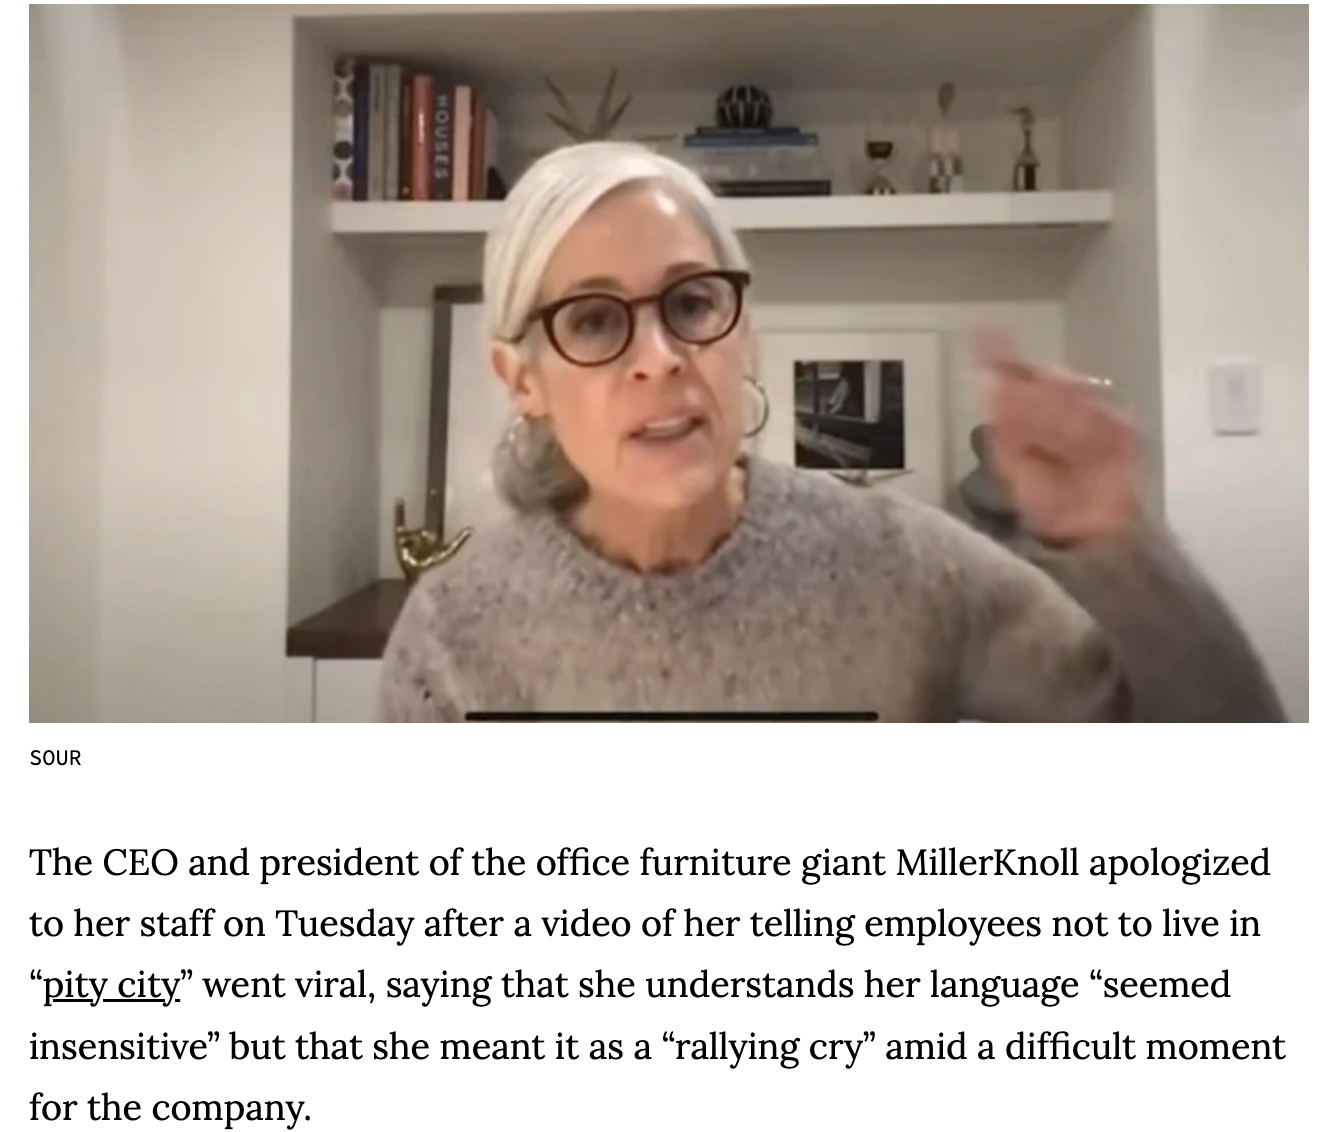 millerknoll ceo - Sour The Ceo and president of the office furniture giant MillerKnoll apologized to her staff on Tuesday after a video of her telling employees not to live in "pity city" went viral, saying that she understands her language "seemed insens